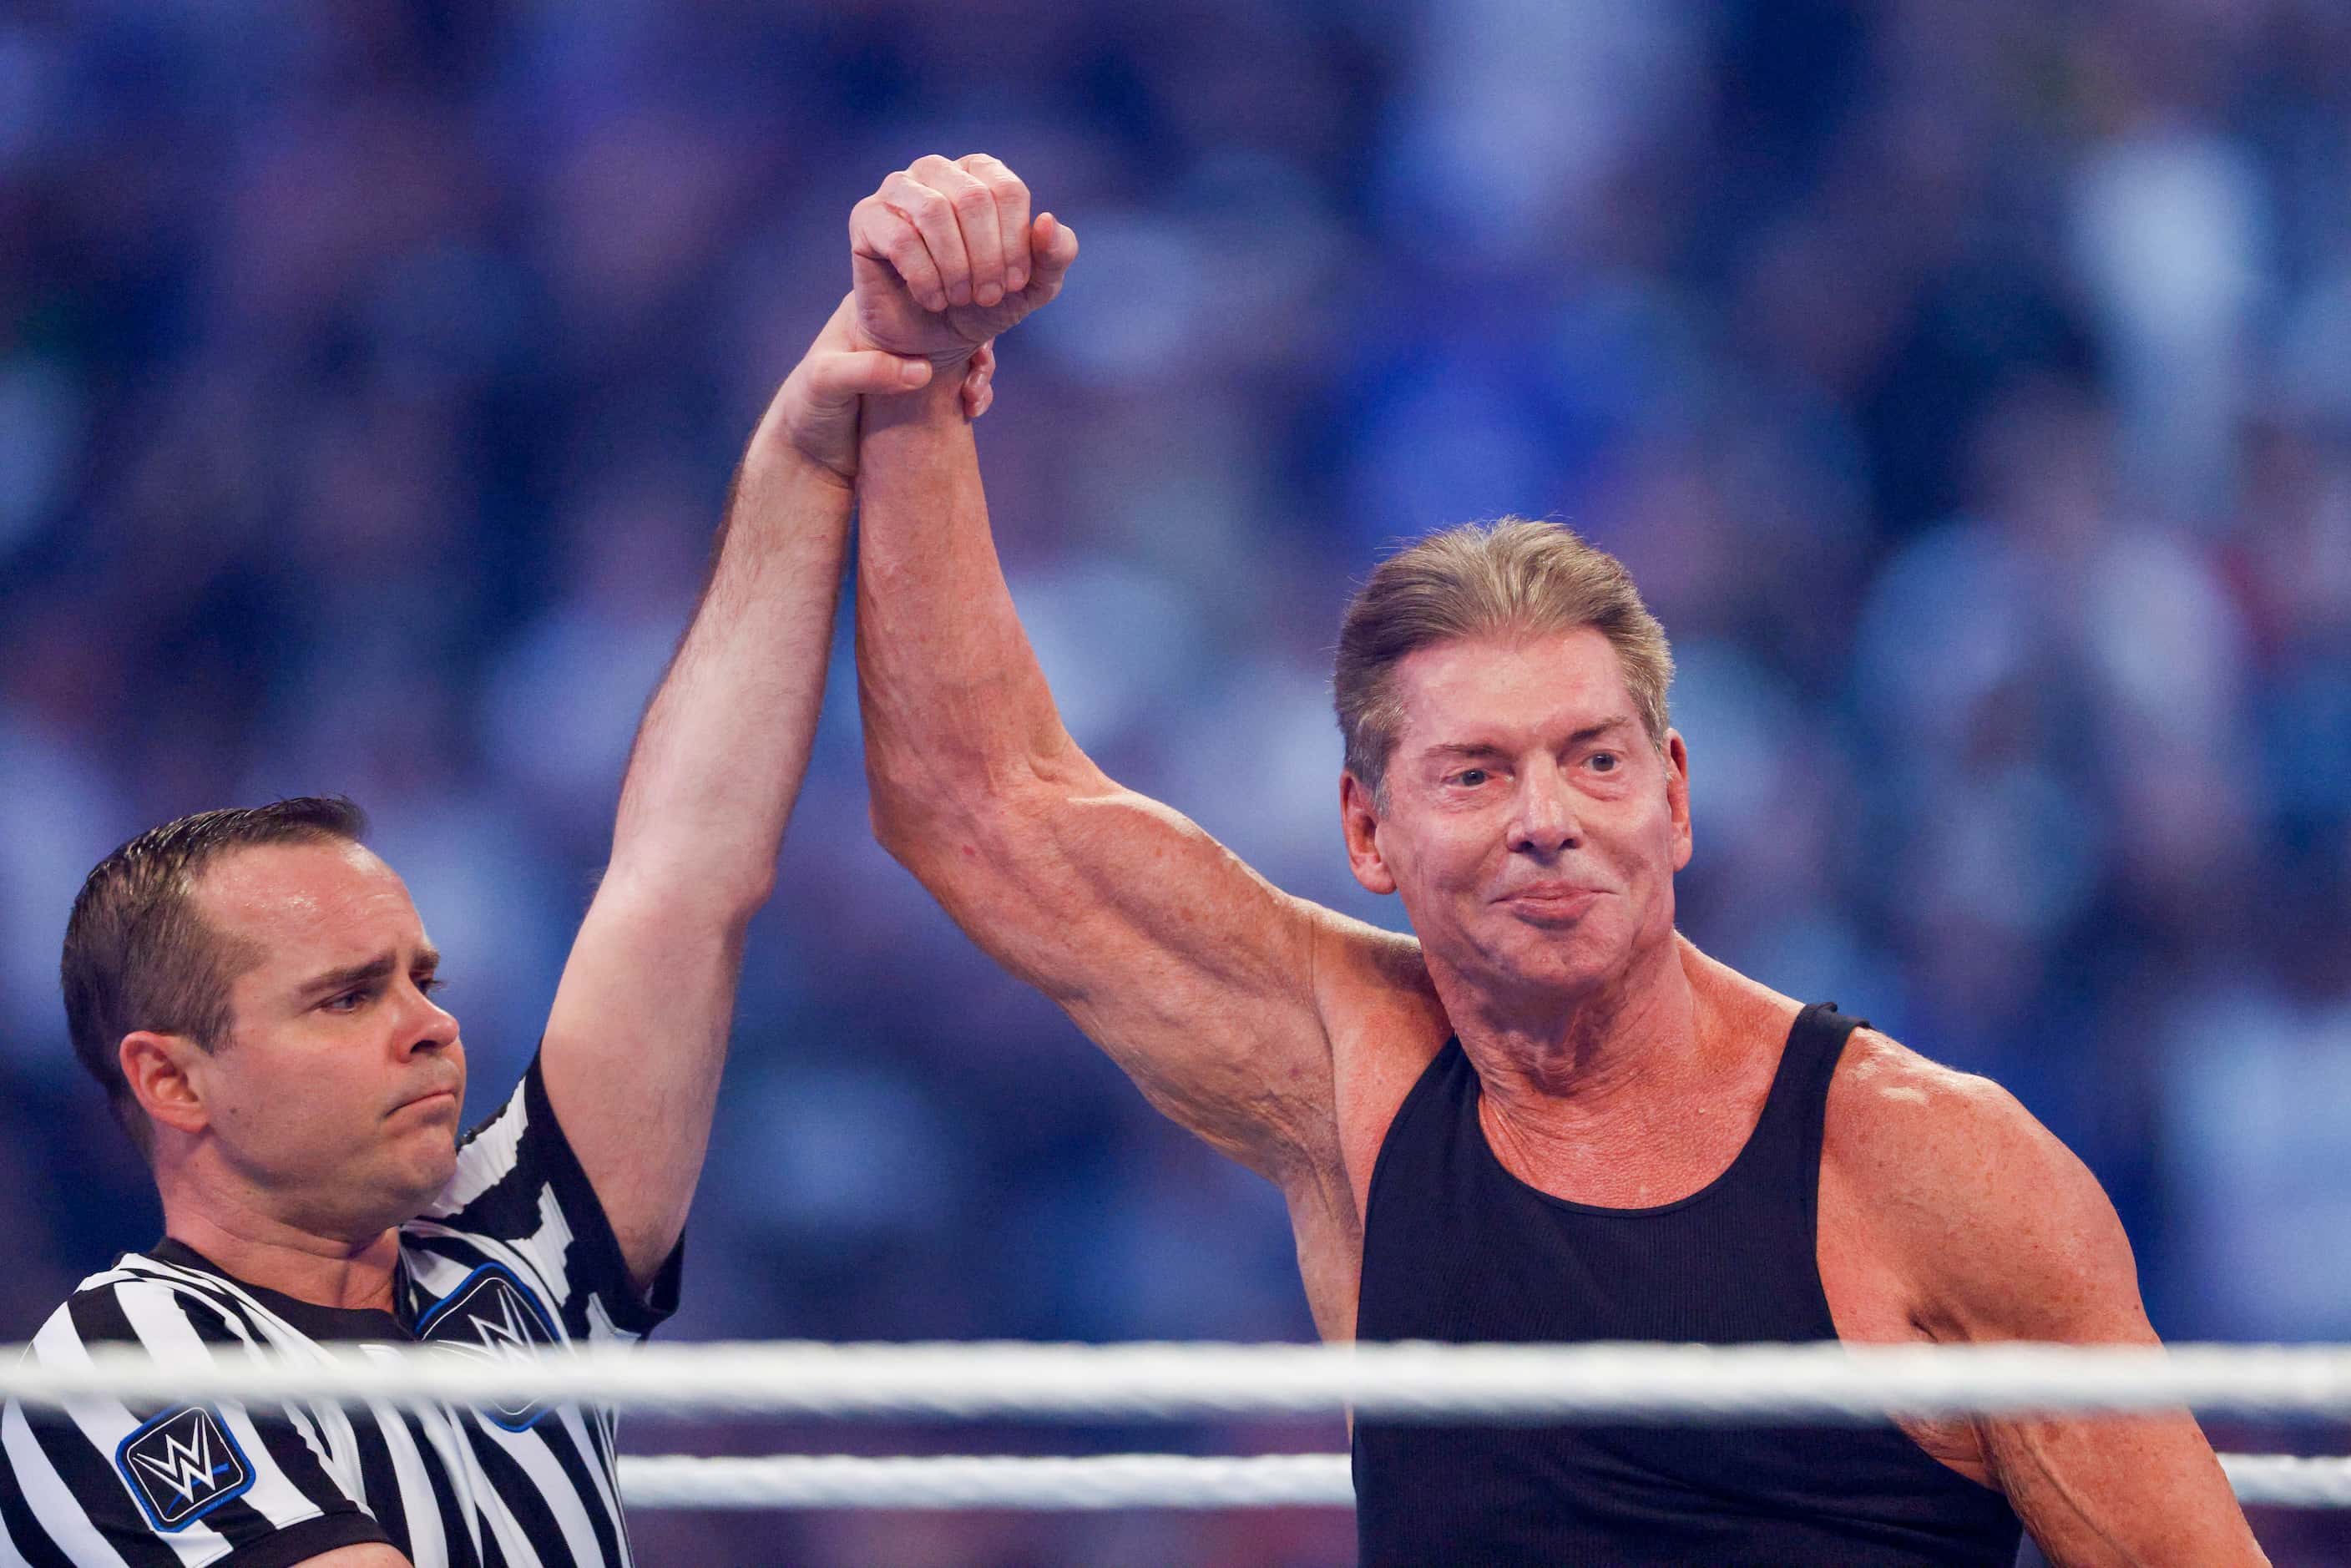 Vince McMahon raises his arm in victory after a match against Pat McAfee at WrestleMania...